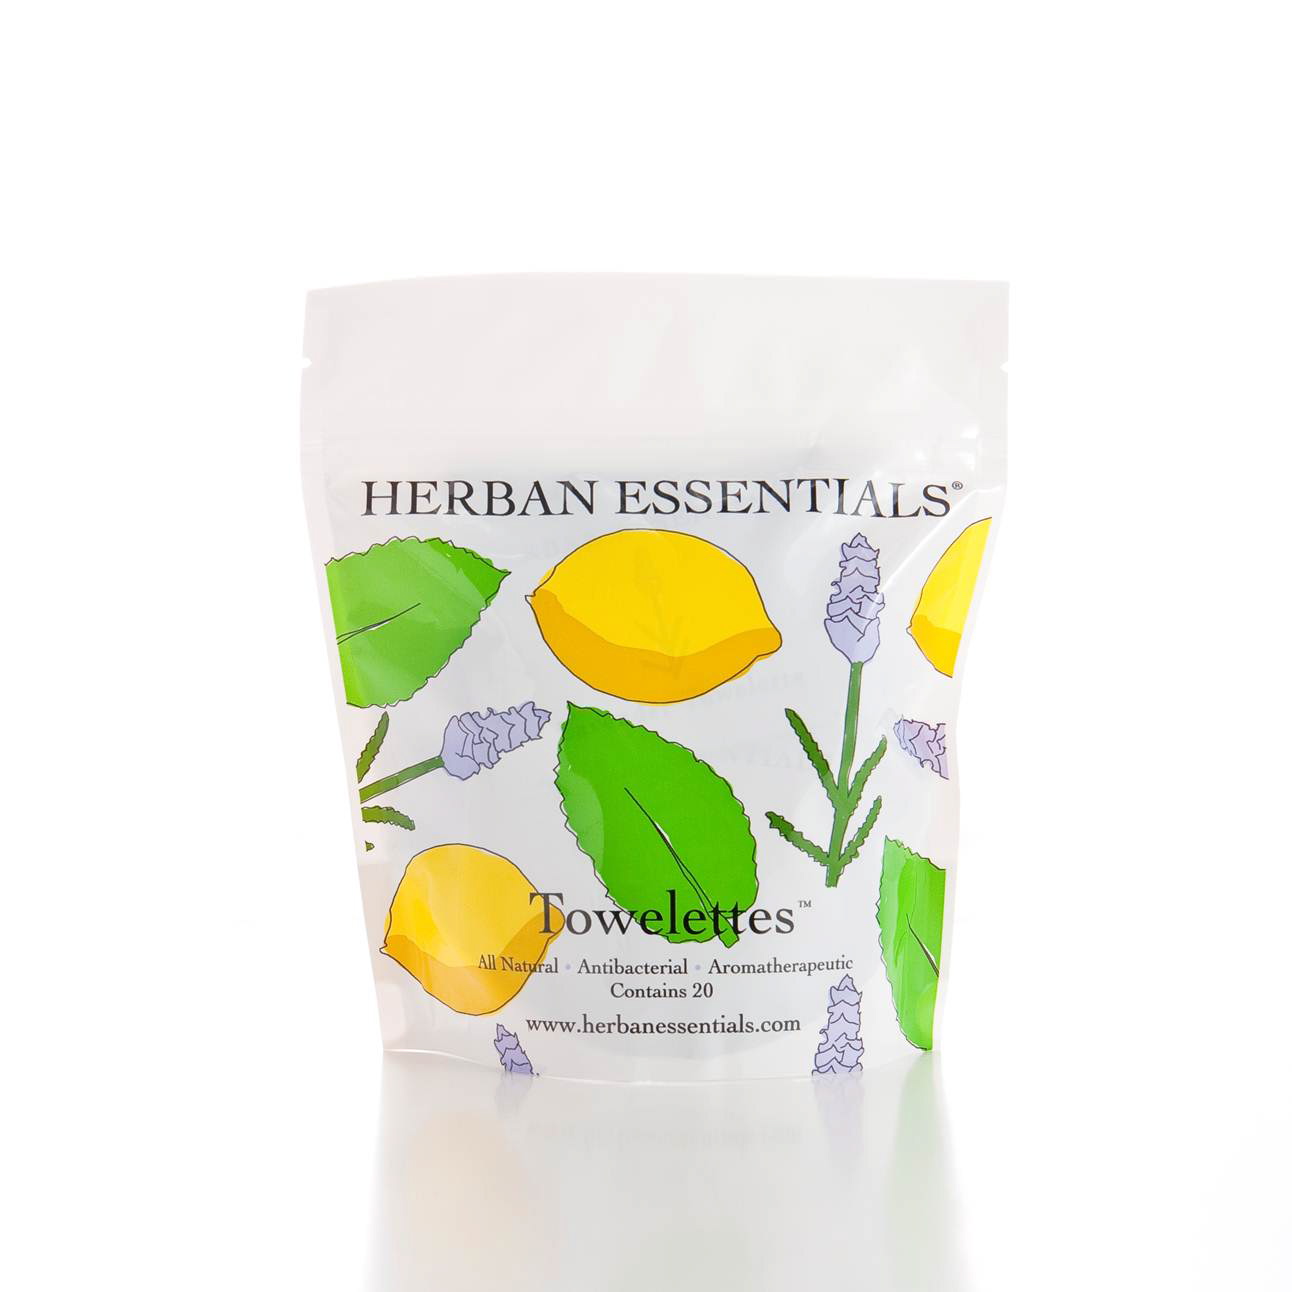 Herban Essentials
Herban Essentials' mixed bag of scented herbal wipes.